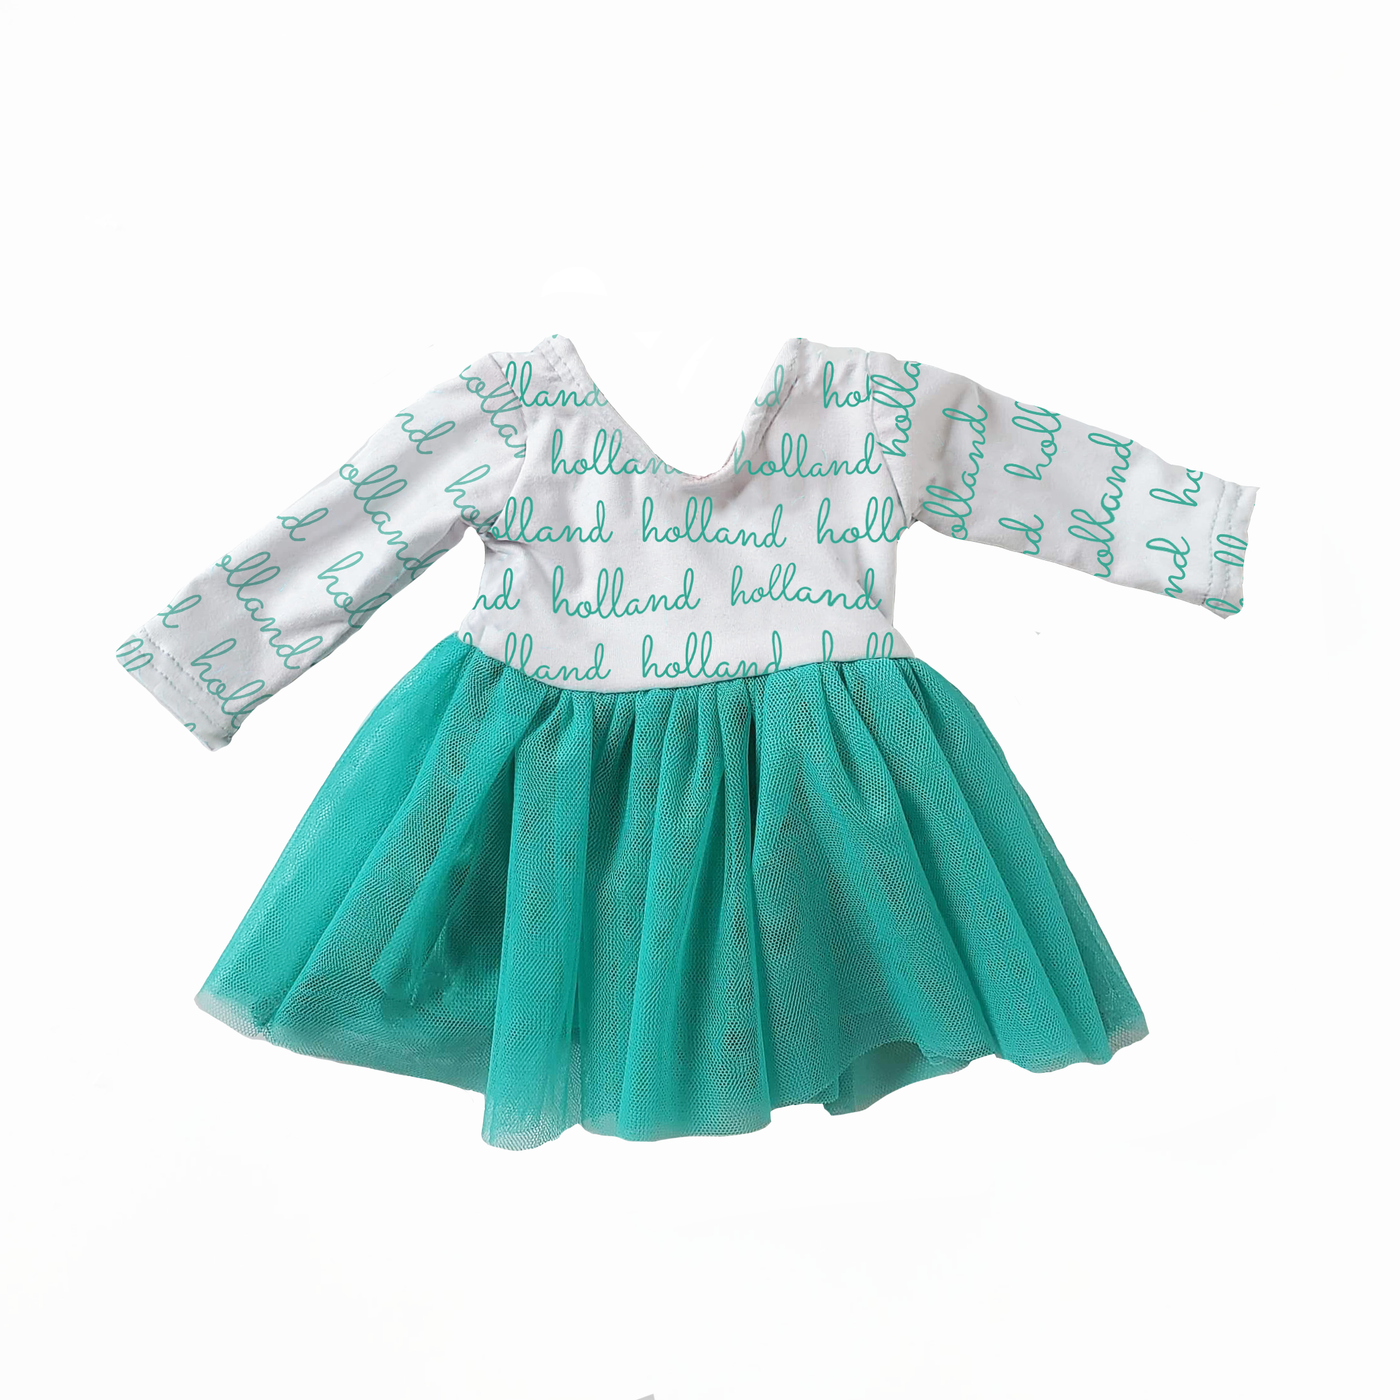 Personalized DOLLY Tulle Dress - 18”